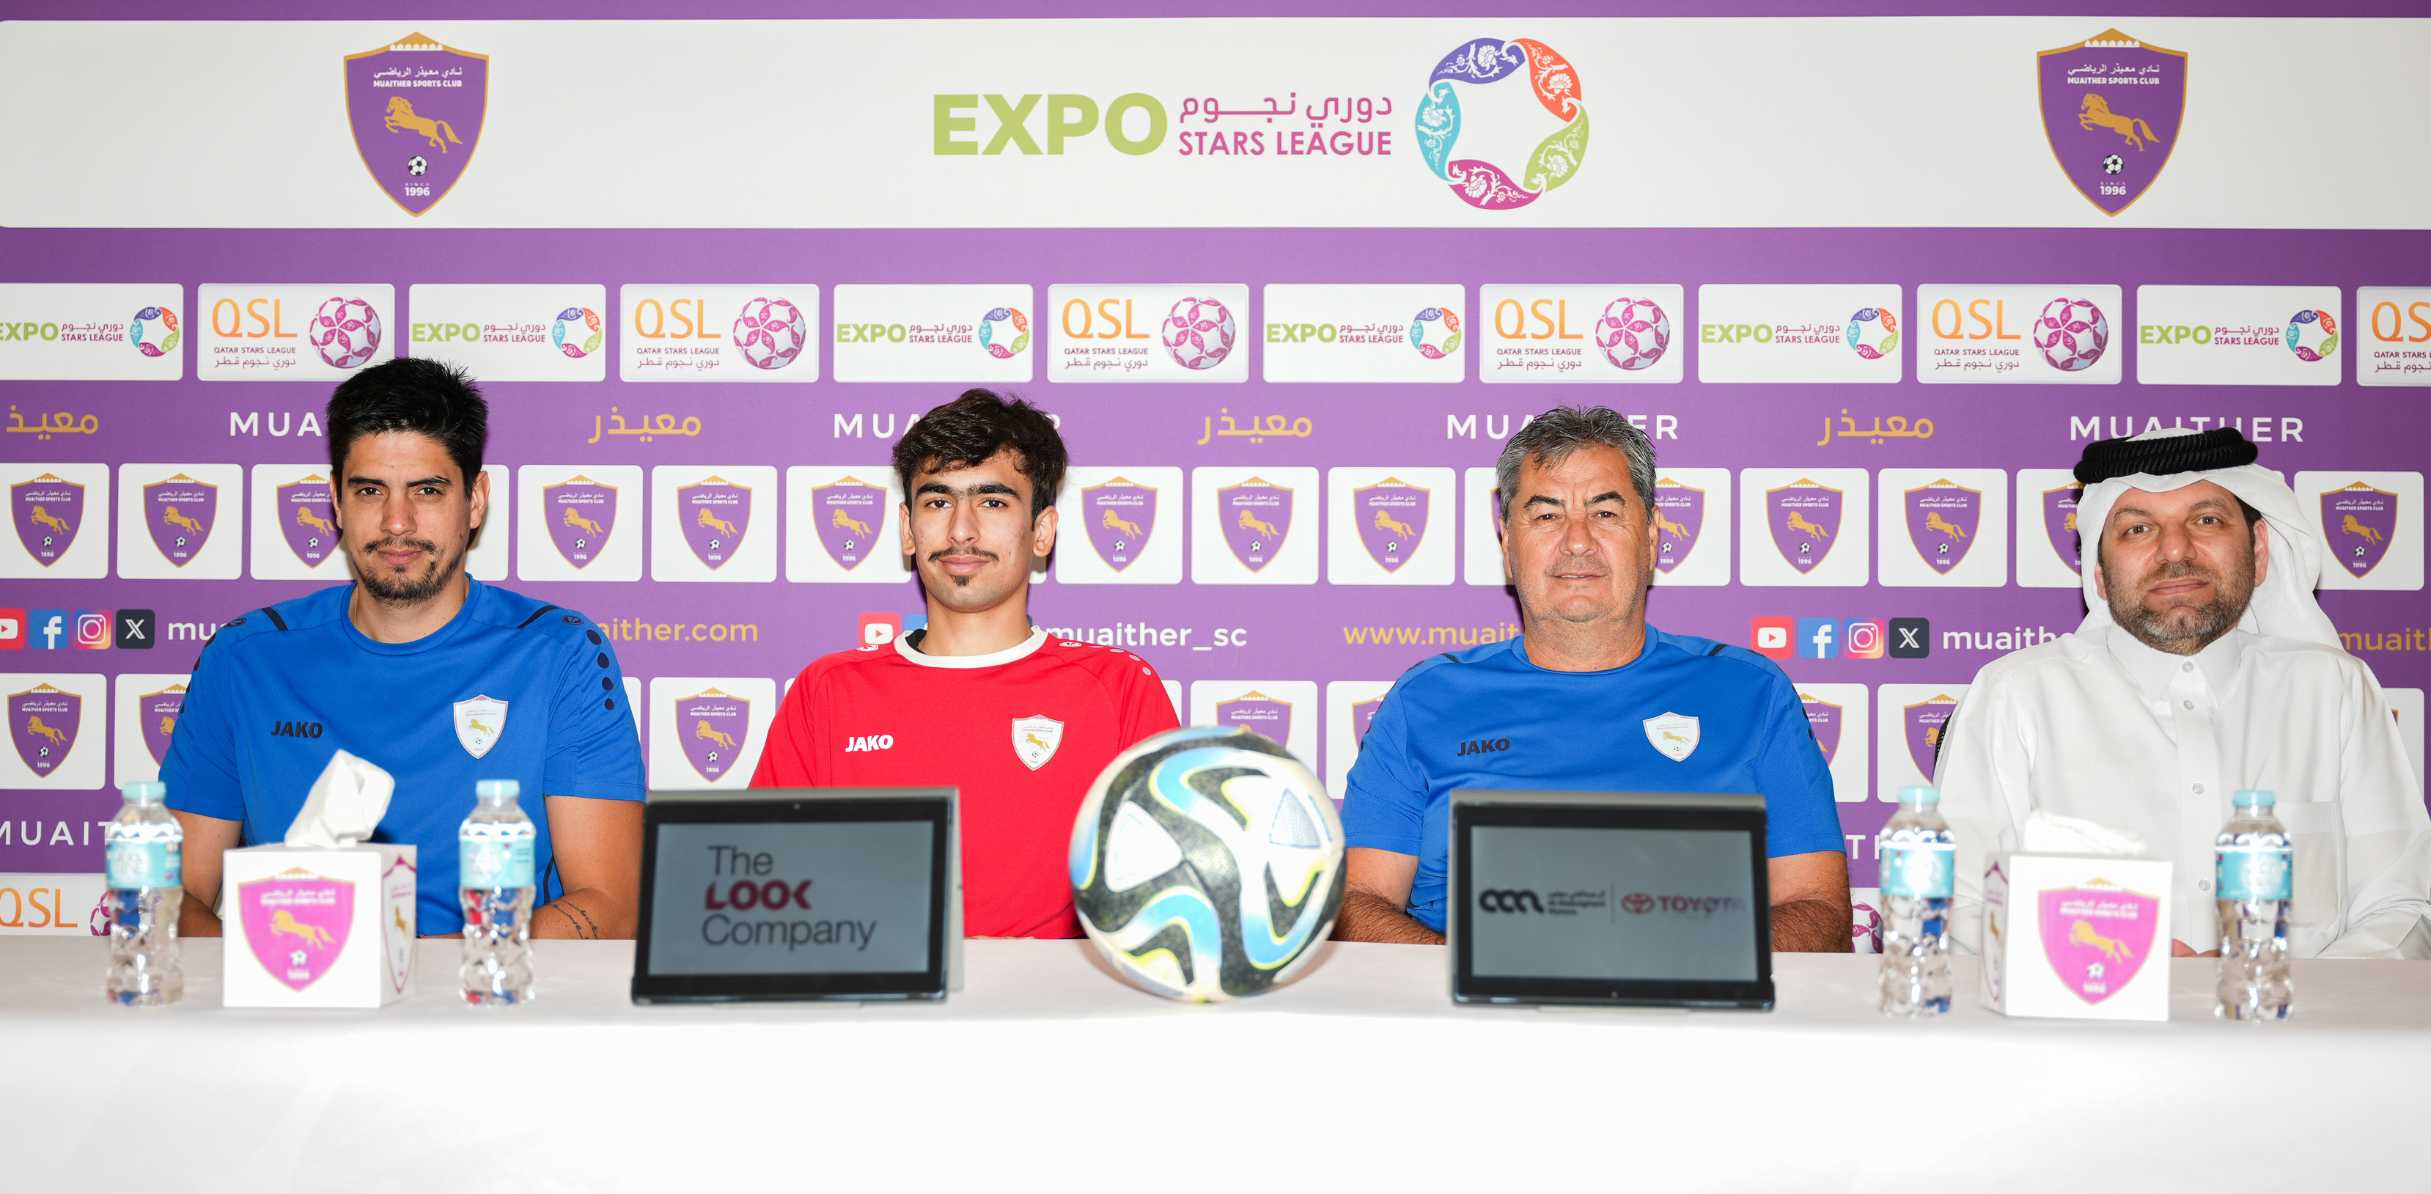 Jorge da Silva - The Qatar Club match is crucial and we are ready for it